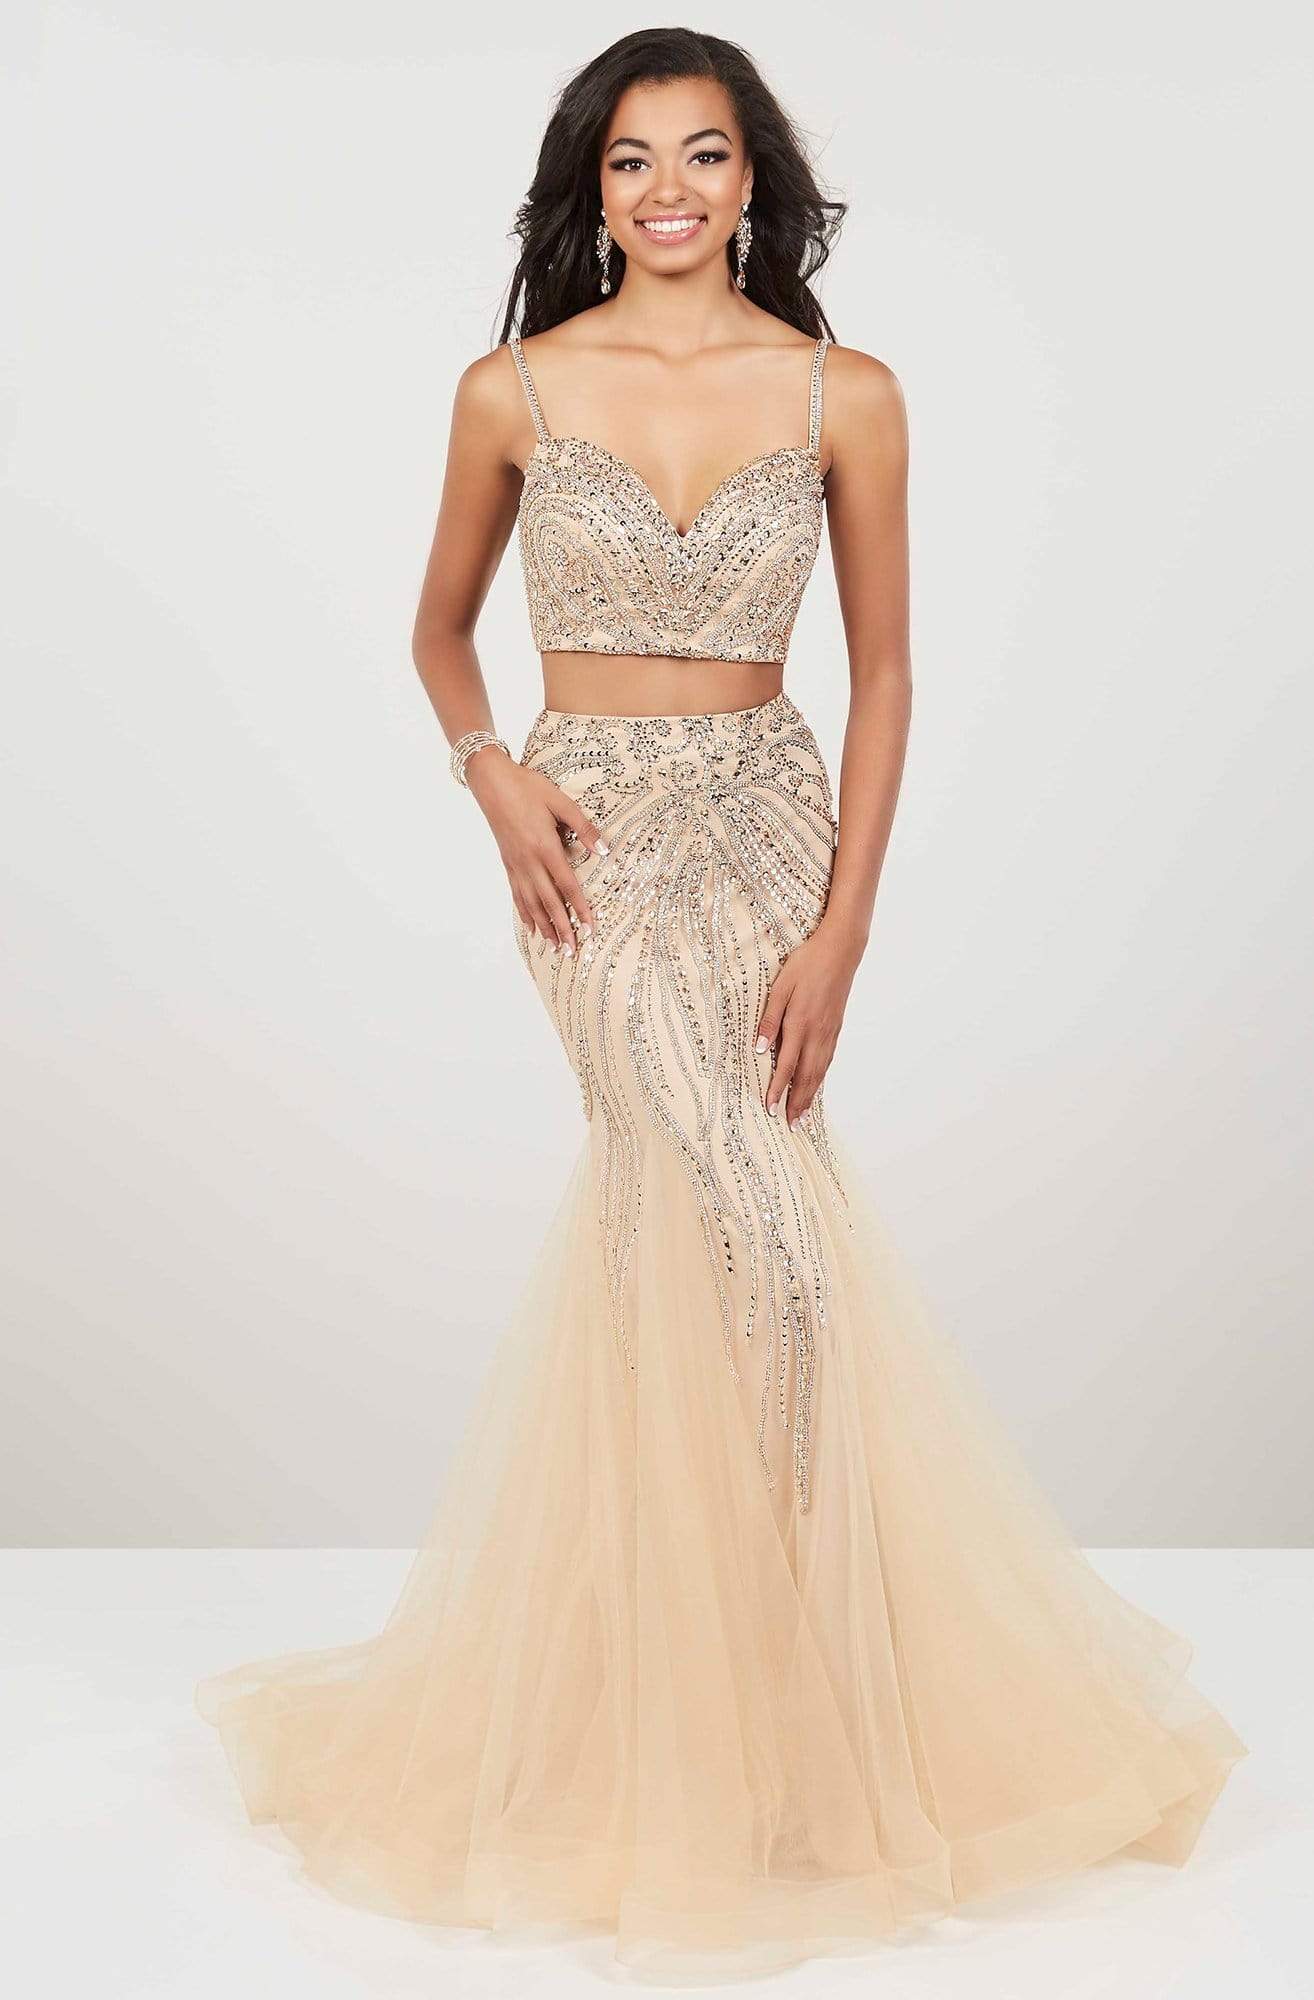 Panoply - 14958SC Bedazzled Spaghetti Straps Two Piece Gown